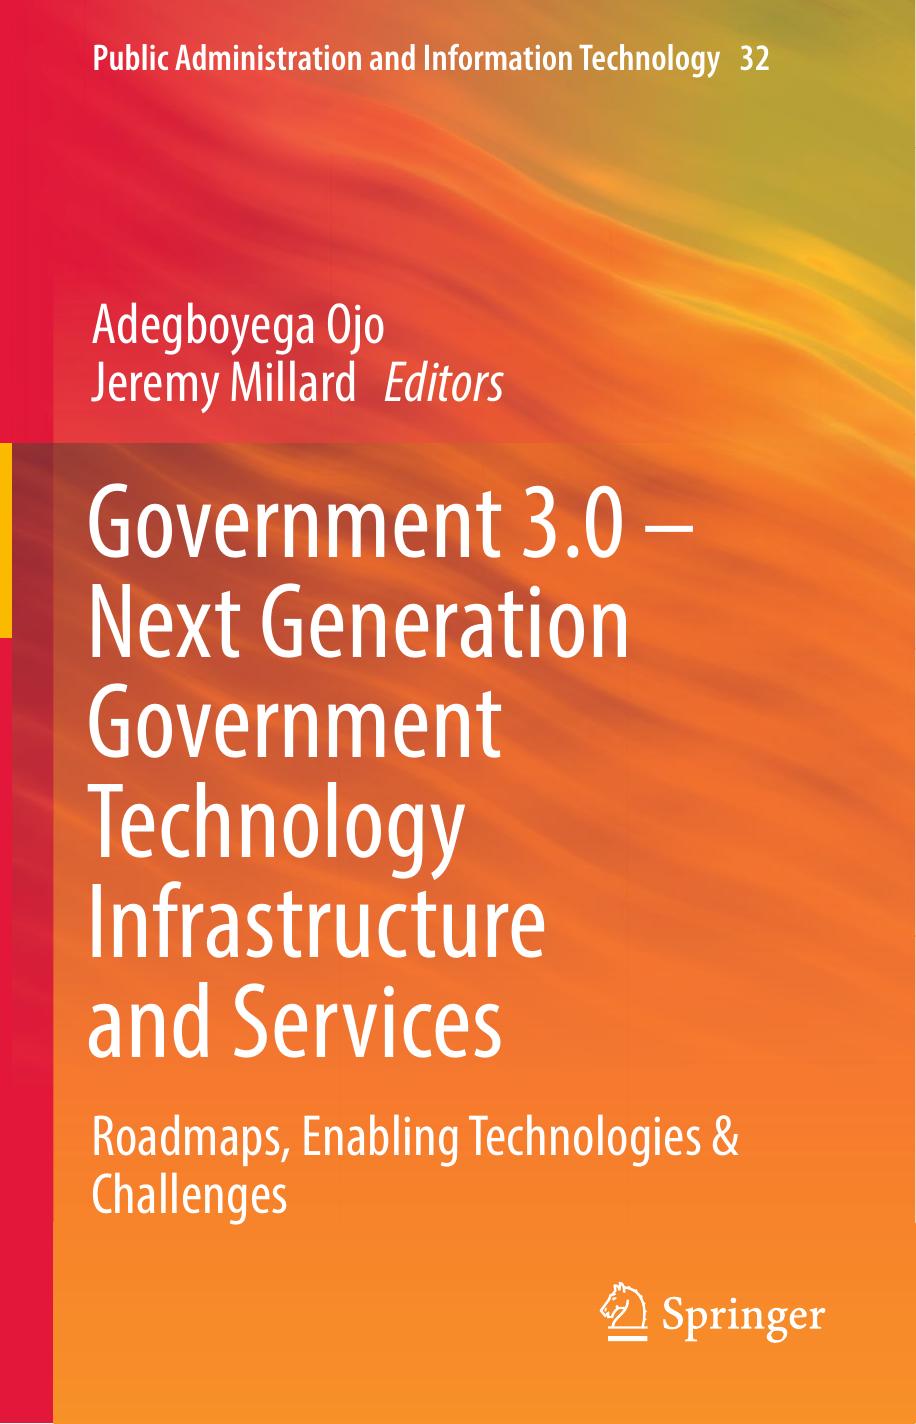 Government 3.0 – Next Generation Government Technology Infrastructure and Services Roadmaps, Enabling Technologies & Challenges, 2017